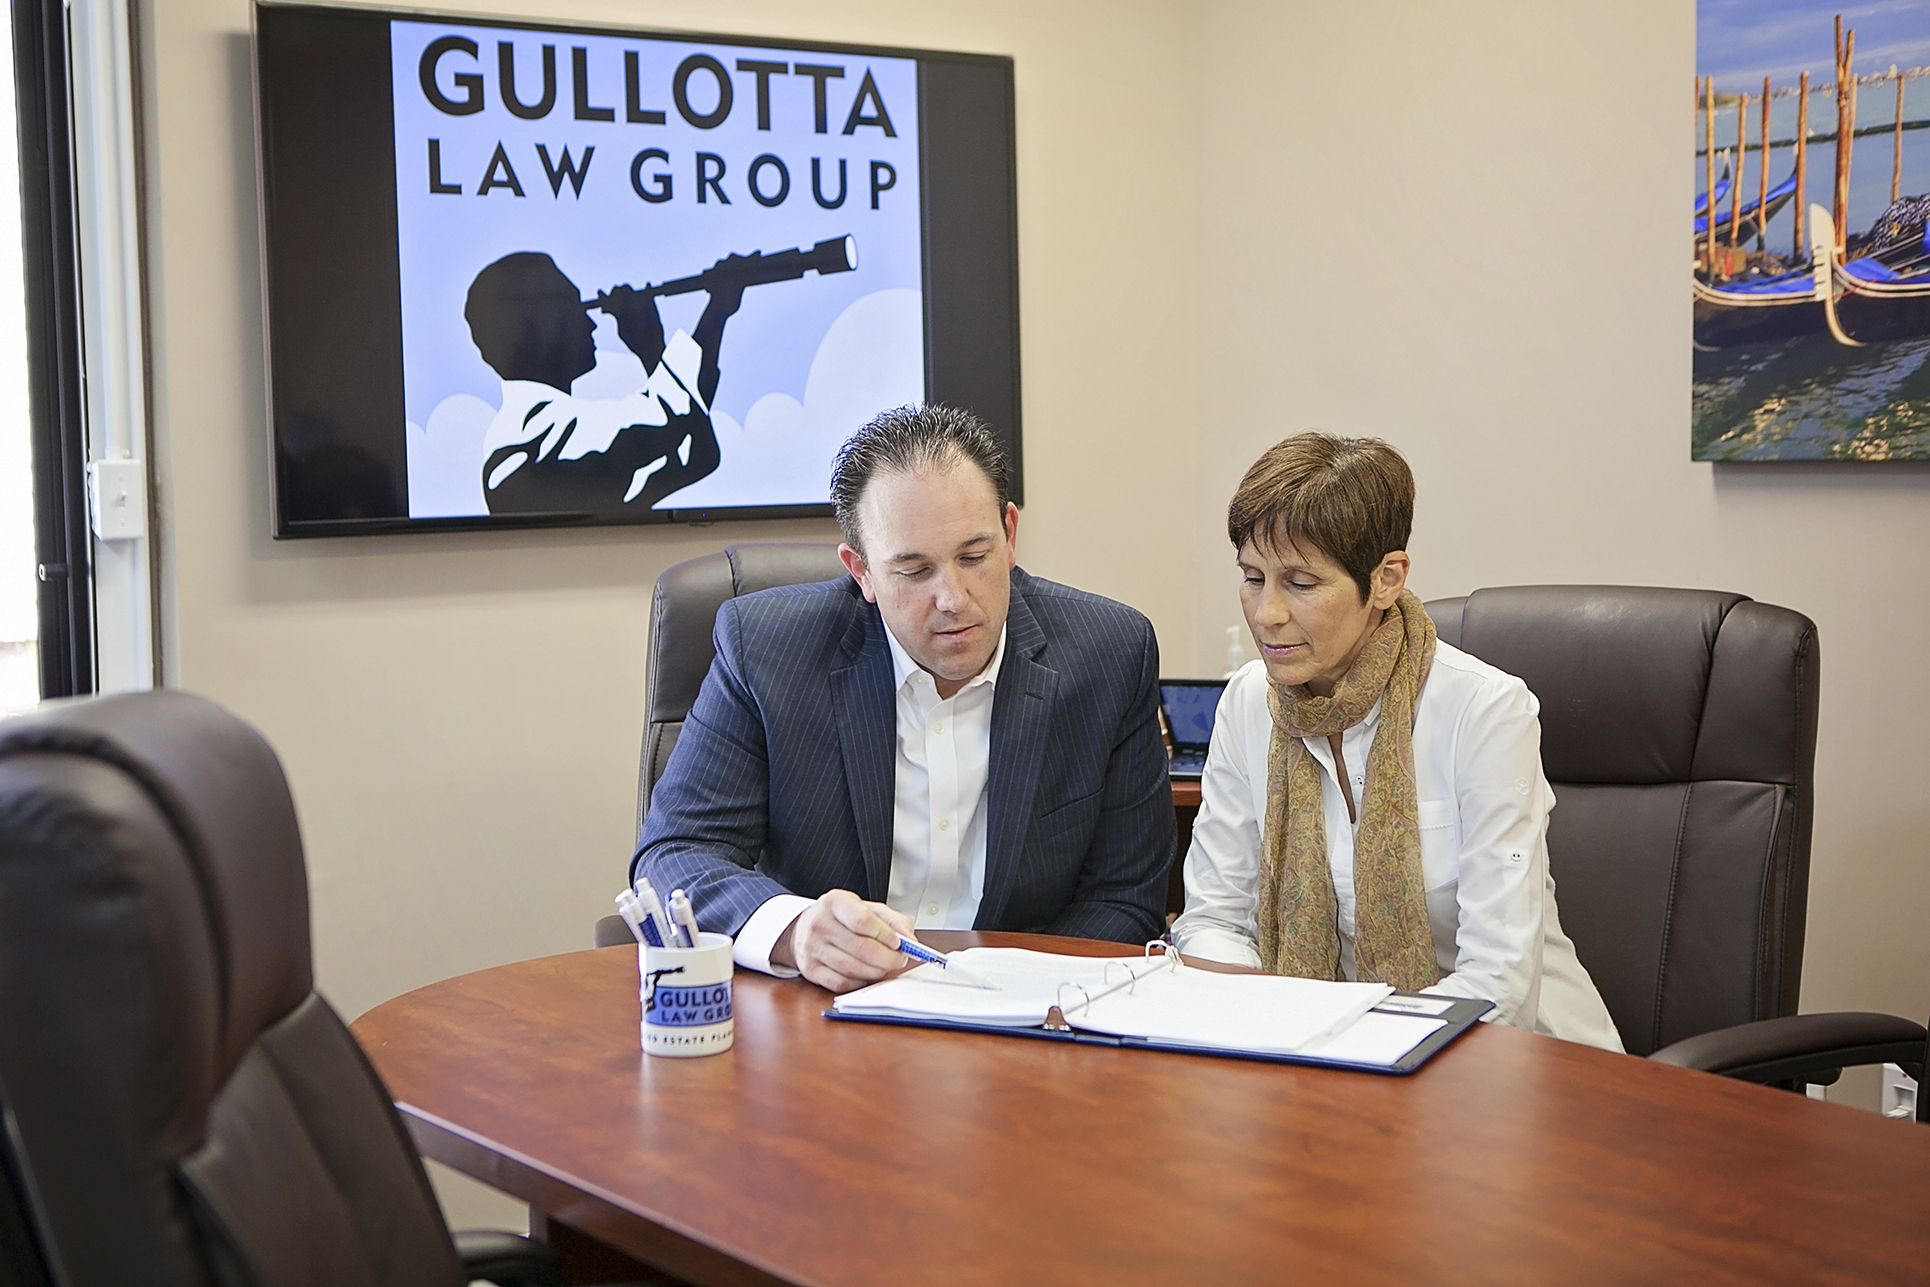 Meeting with a Woman in the Gullotta Law Group Conference Room